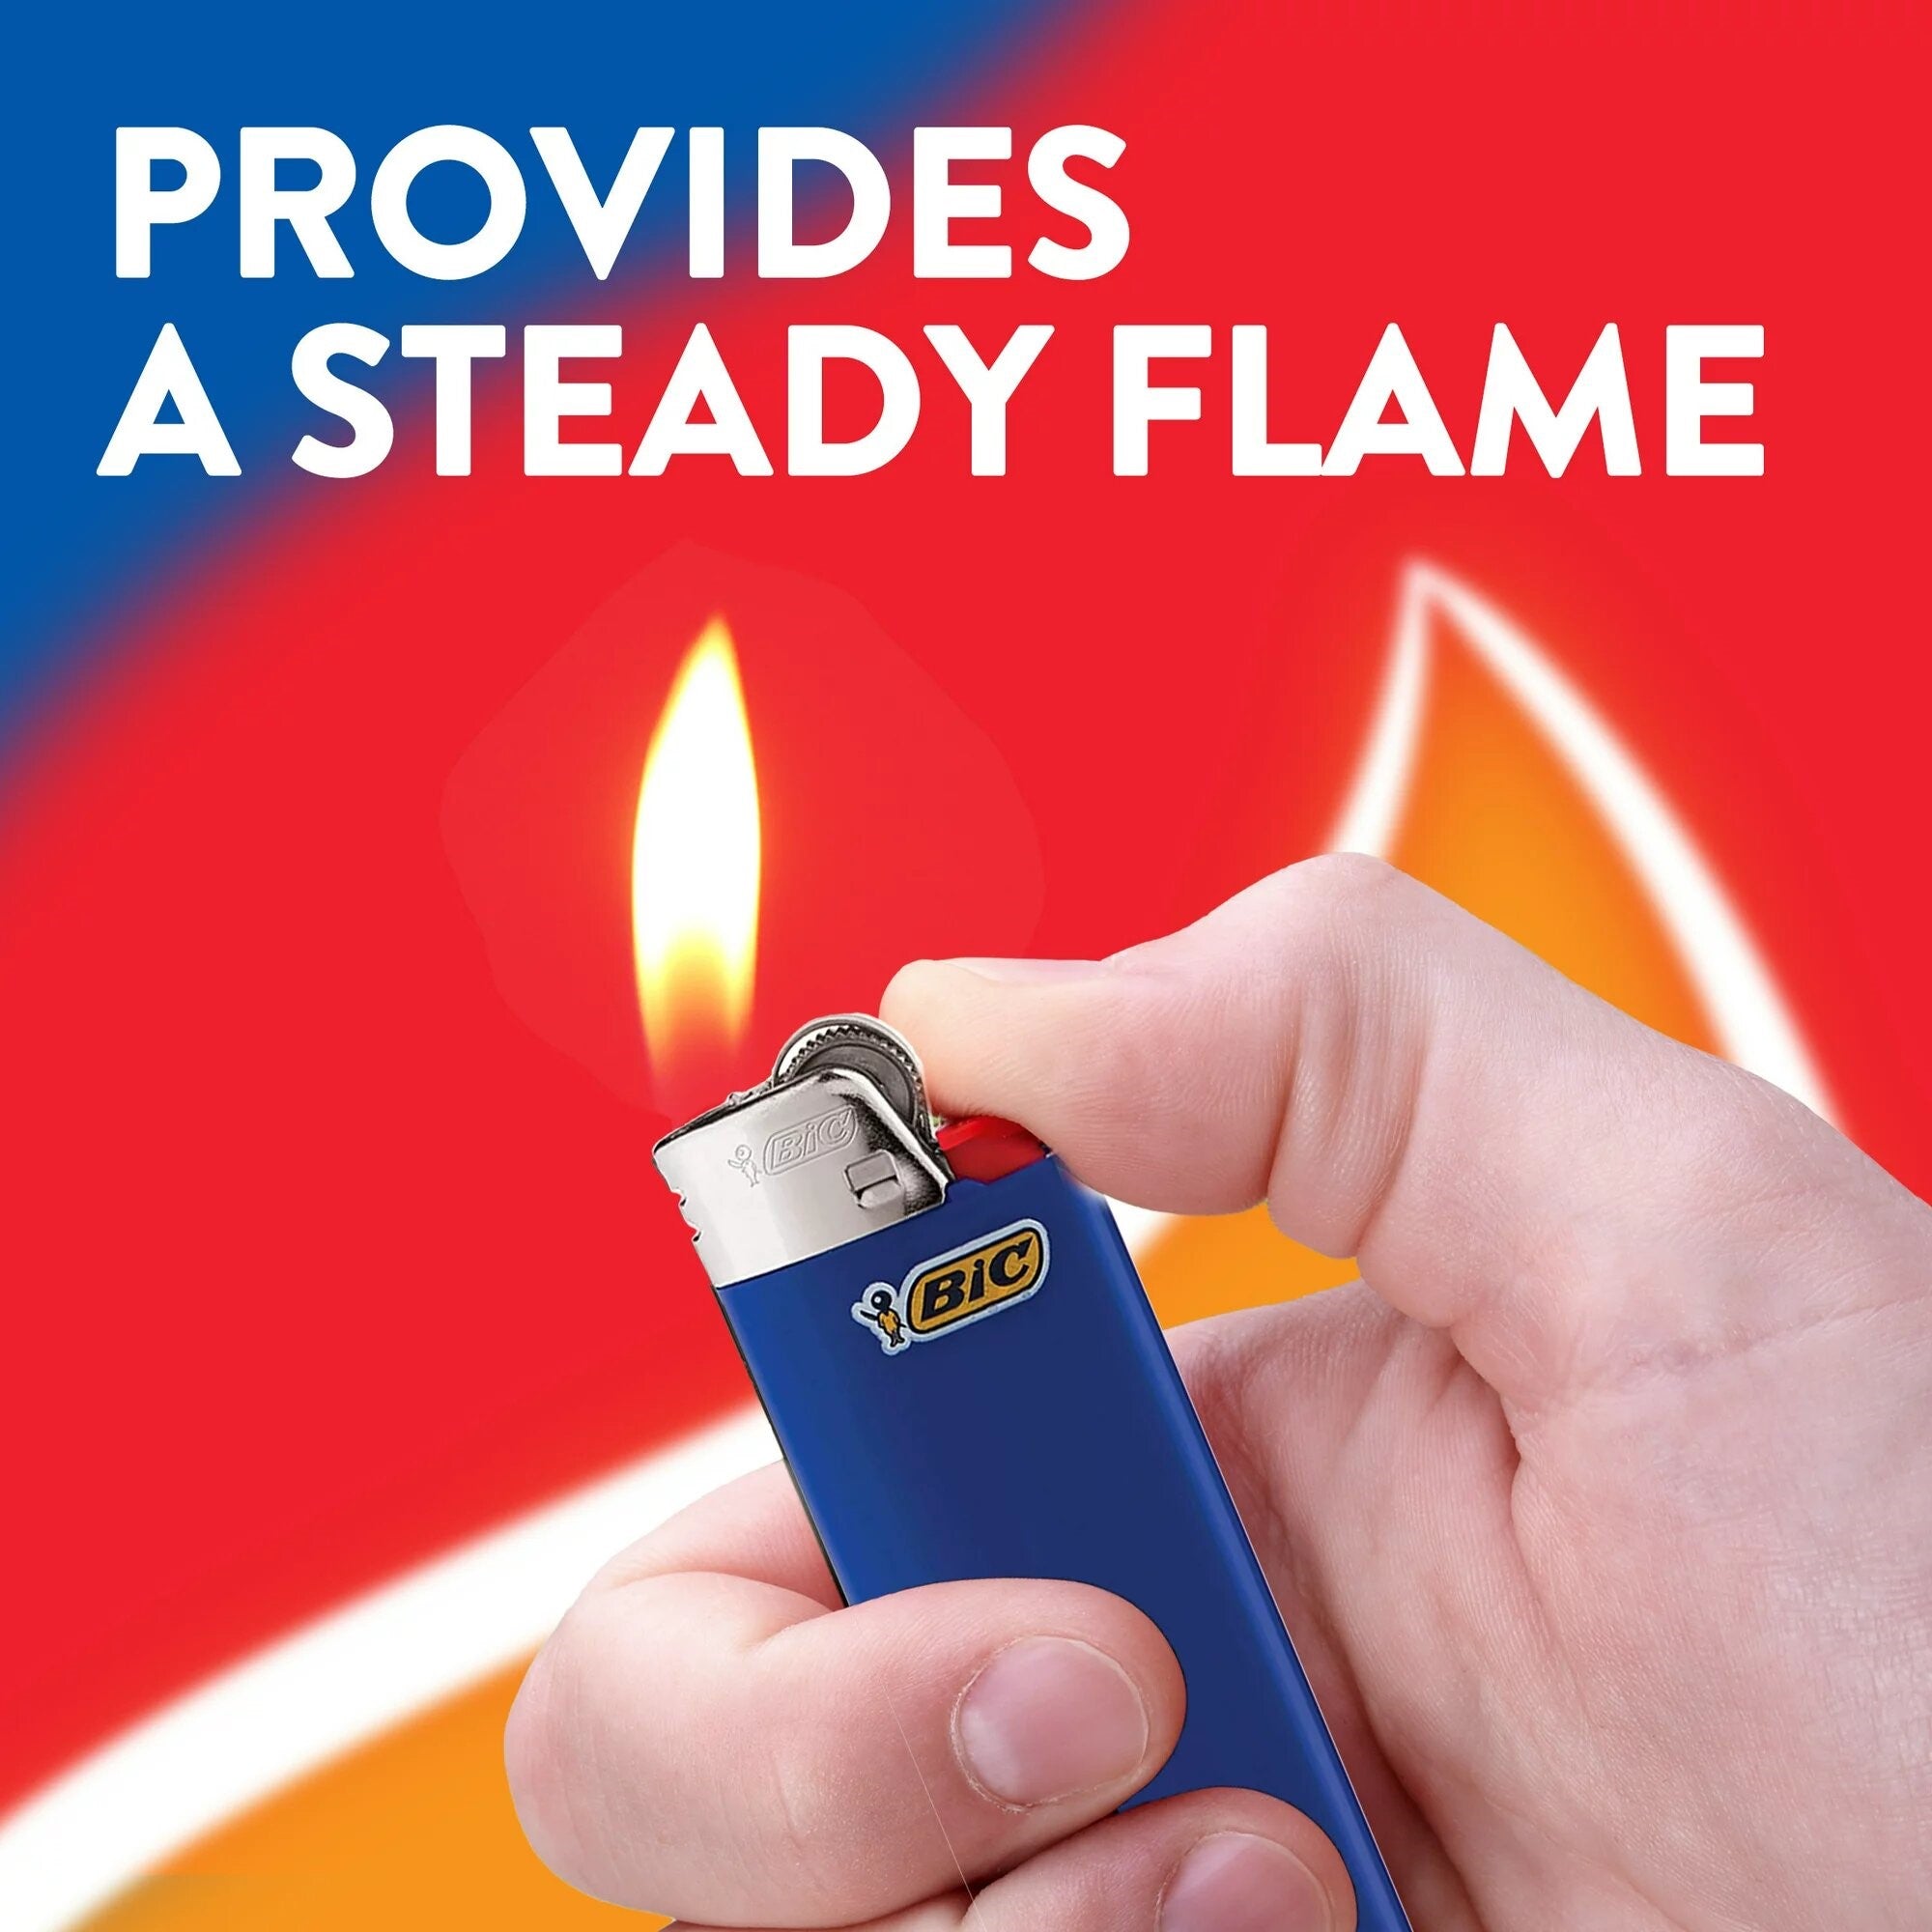 Superior flame even at 45 degrees of BiC lighters, Maxi J6